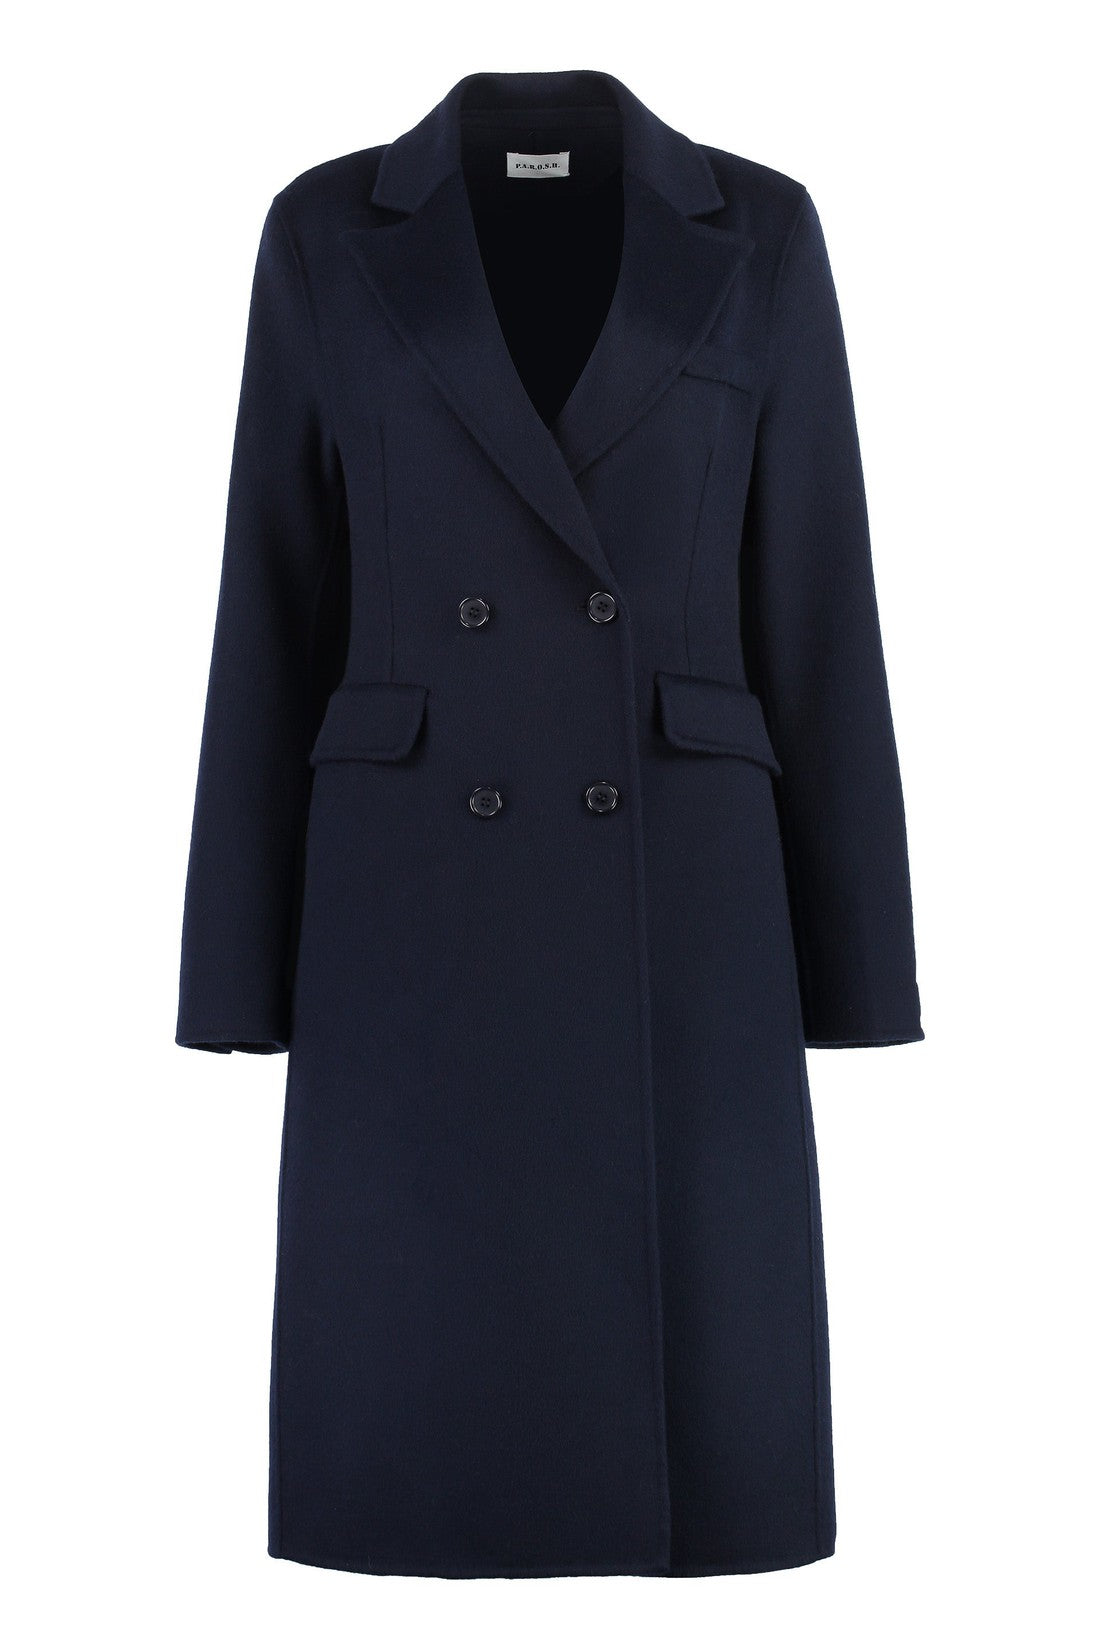 Parosh-OUTLET-SALE-Double-breasted wool coat-ARCHIVIST